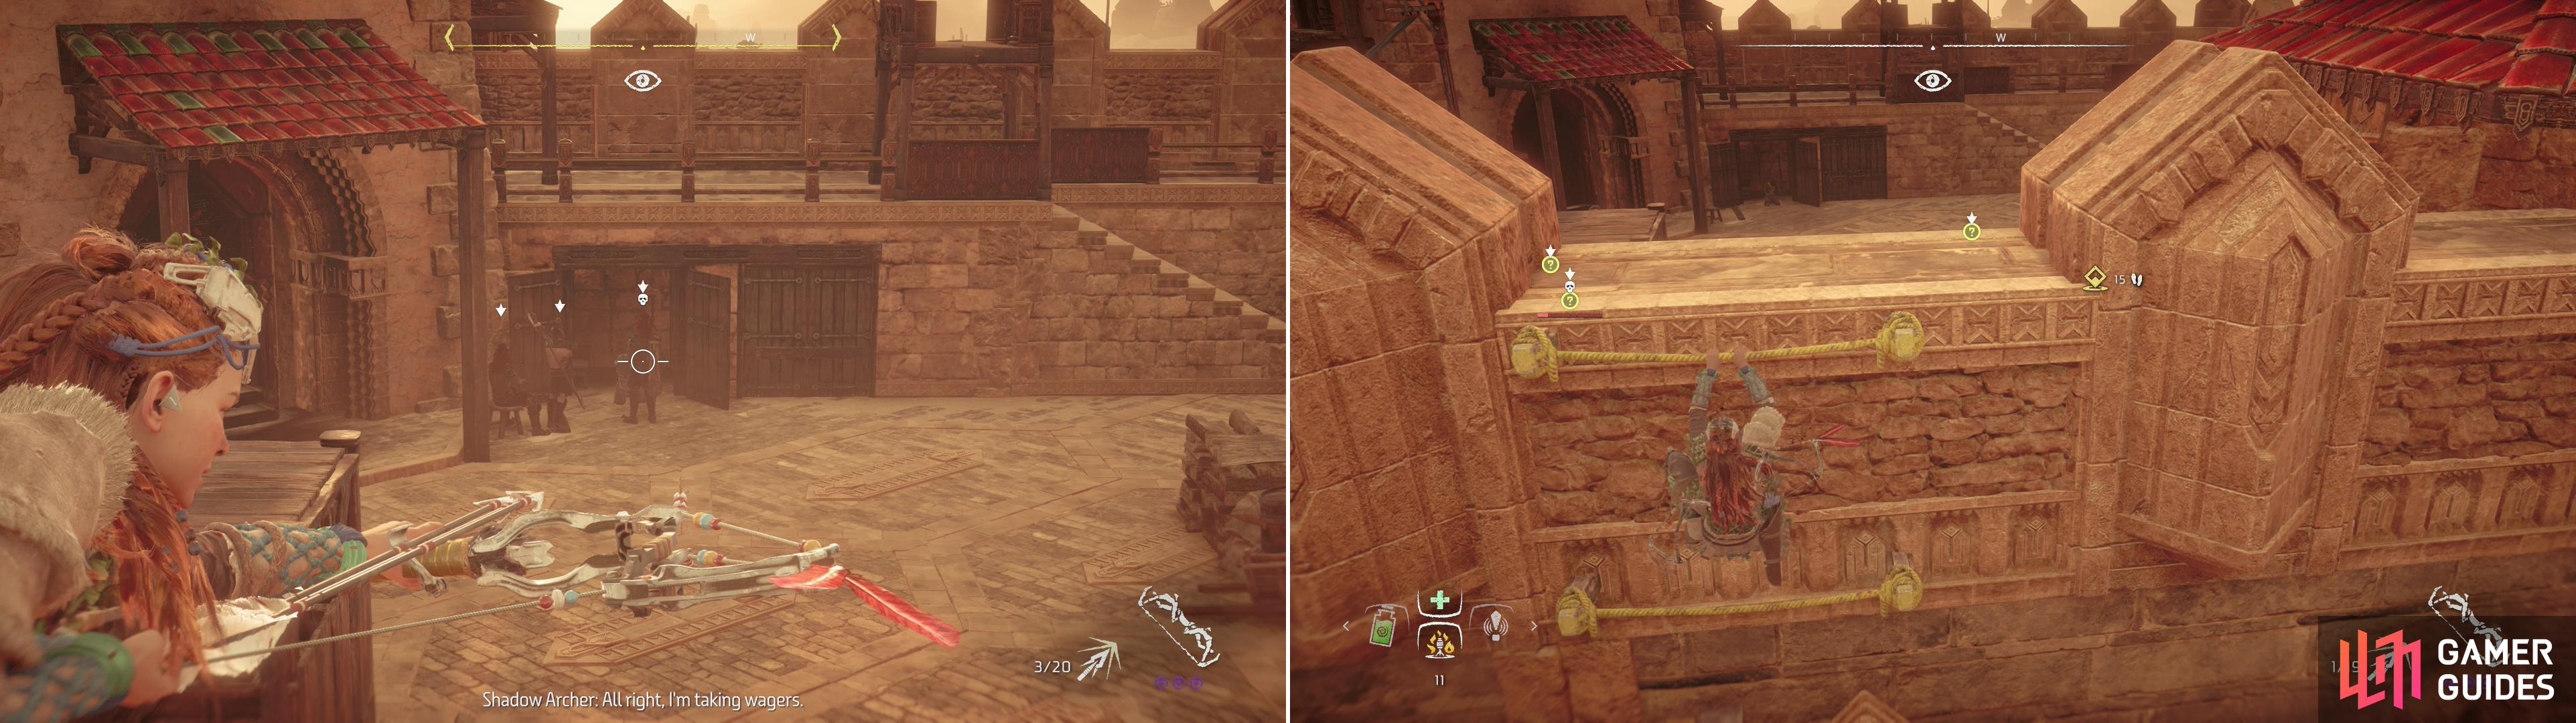 Assassinate the Shadow Carja in the keep (left) and take cover along a wall if they get wary (right).